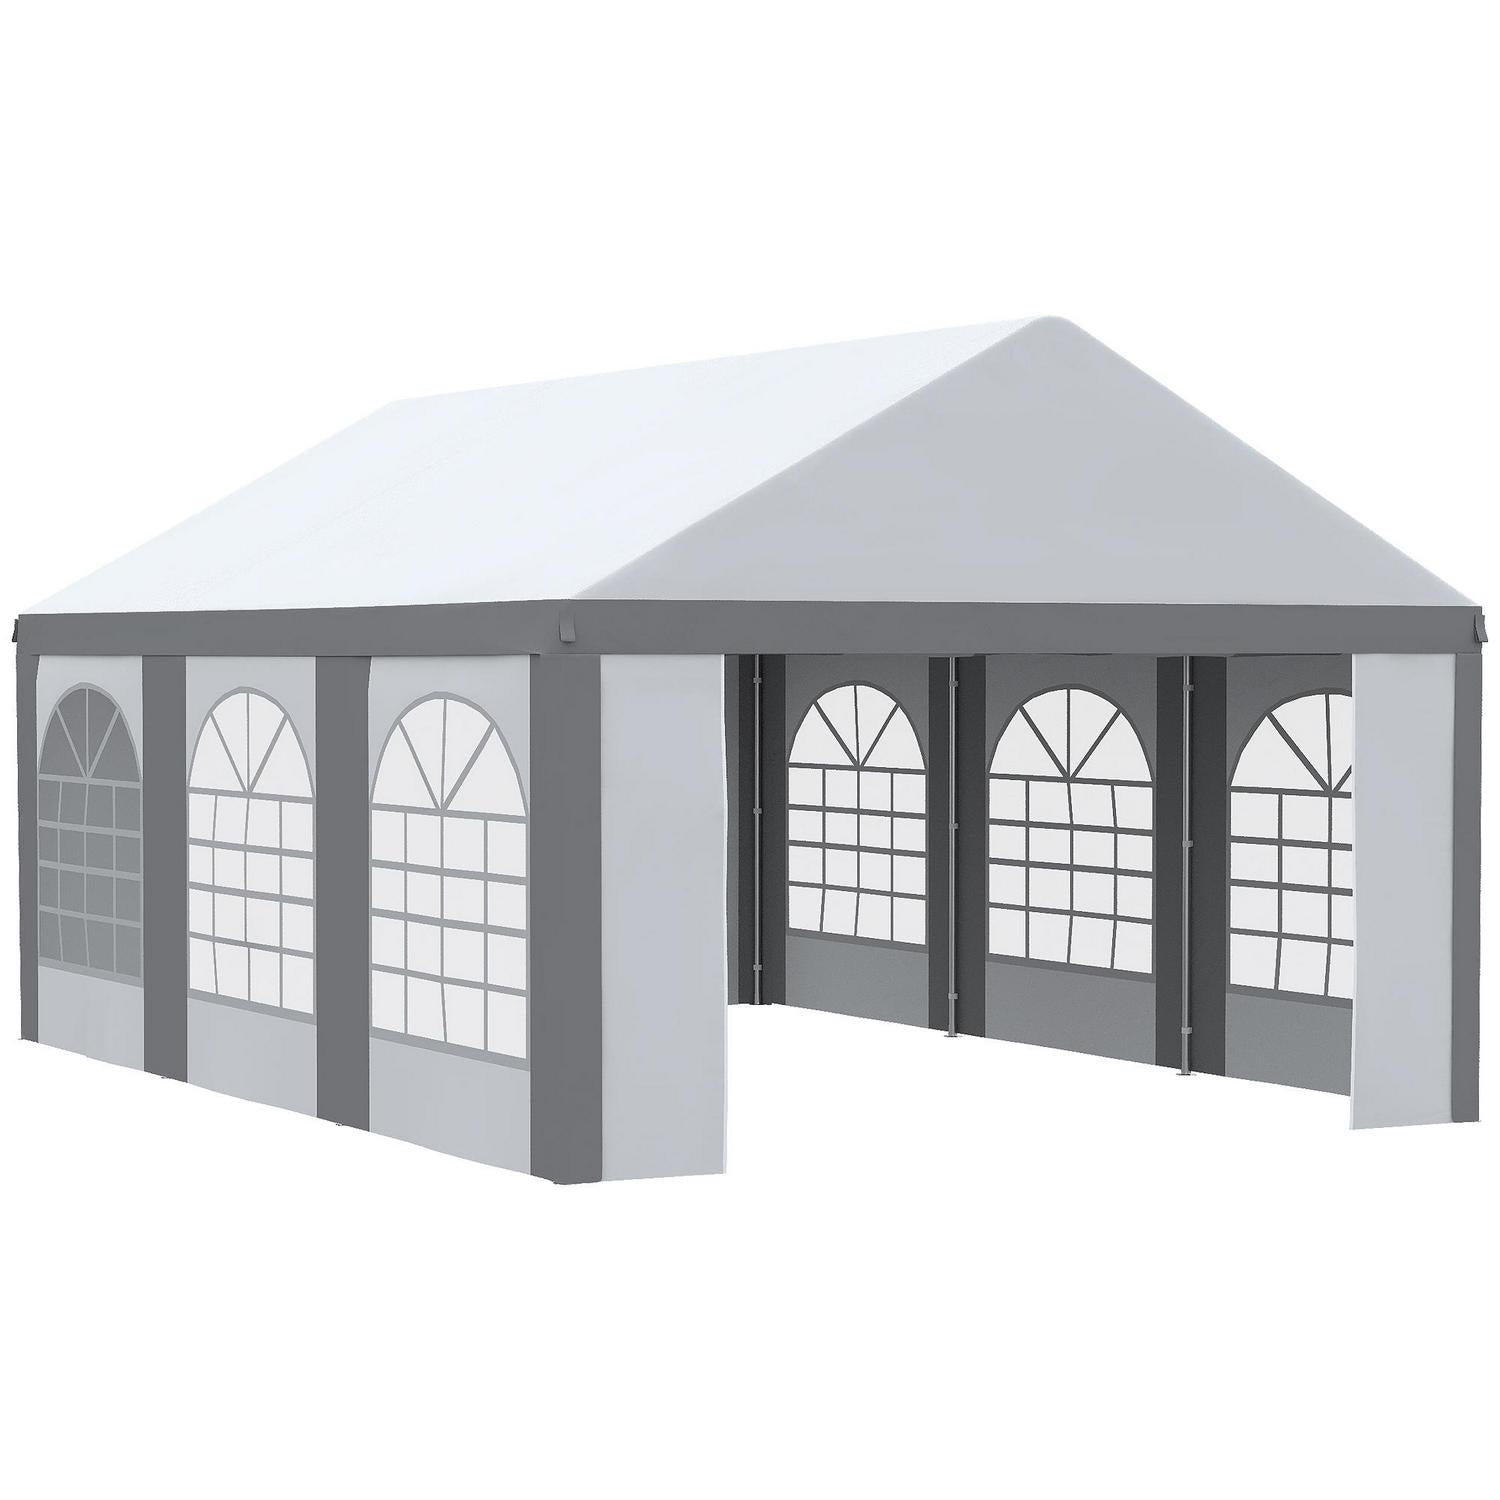 Galvanised Party Tent, Marquee Gazebo With Sides- White Grey